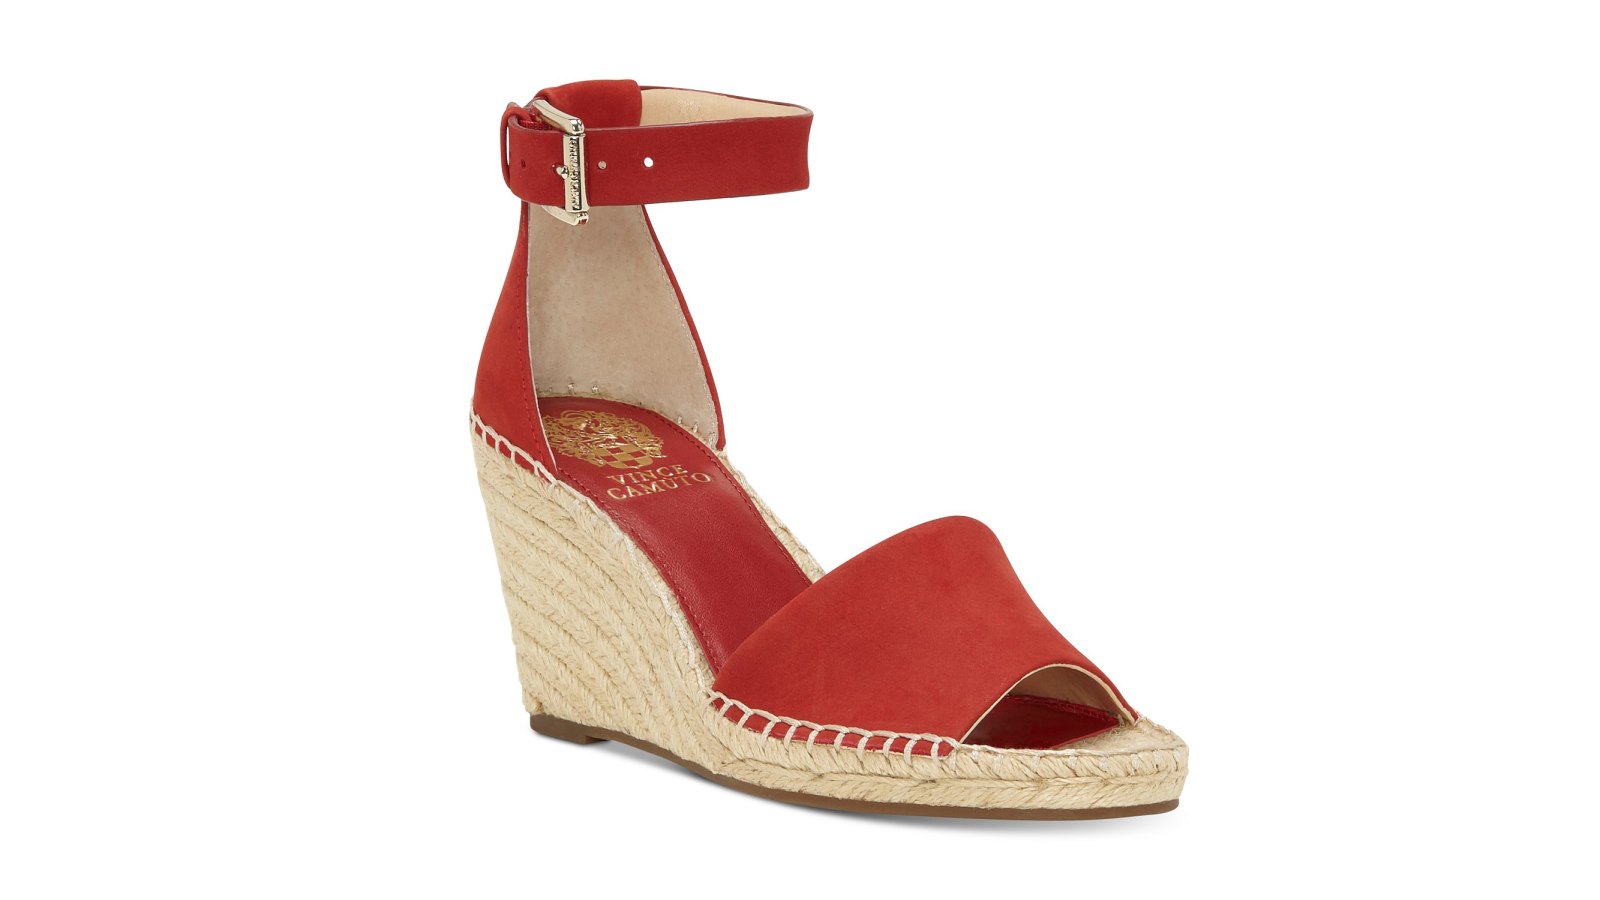 It's the Last Day to Save on These Stylish Summer Sandals at Macy's ...